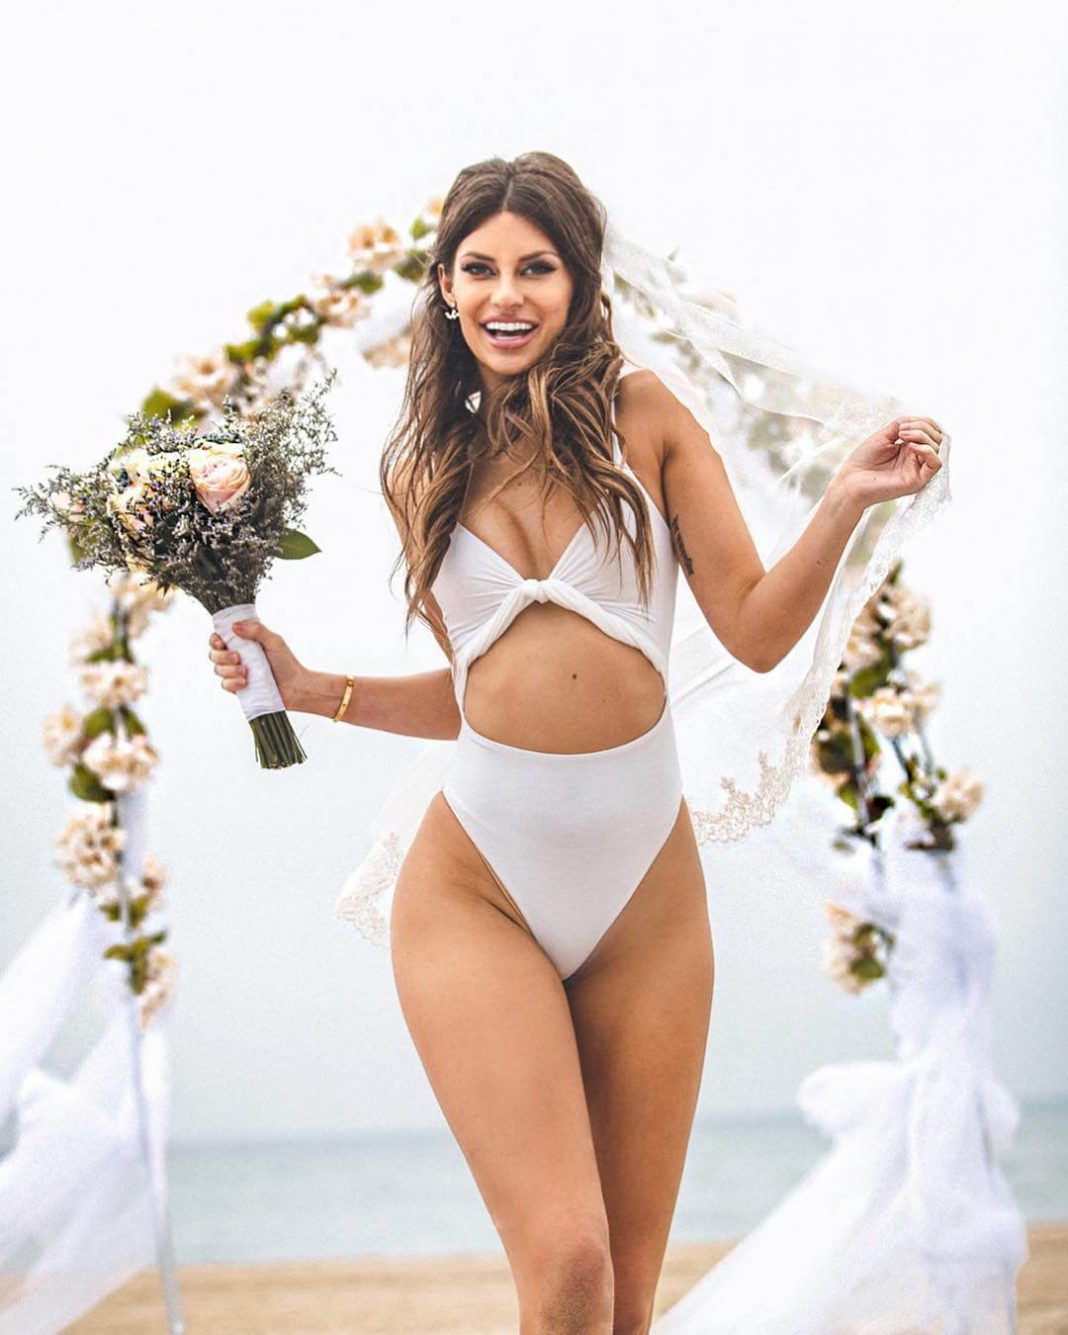 51 Hannah Stocking Nude Pictures Will Make You Slobber Over Her 25